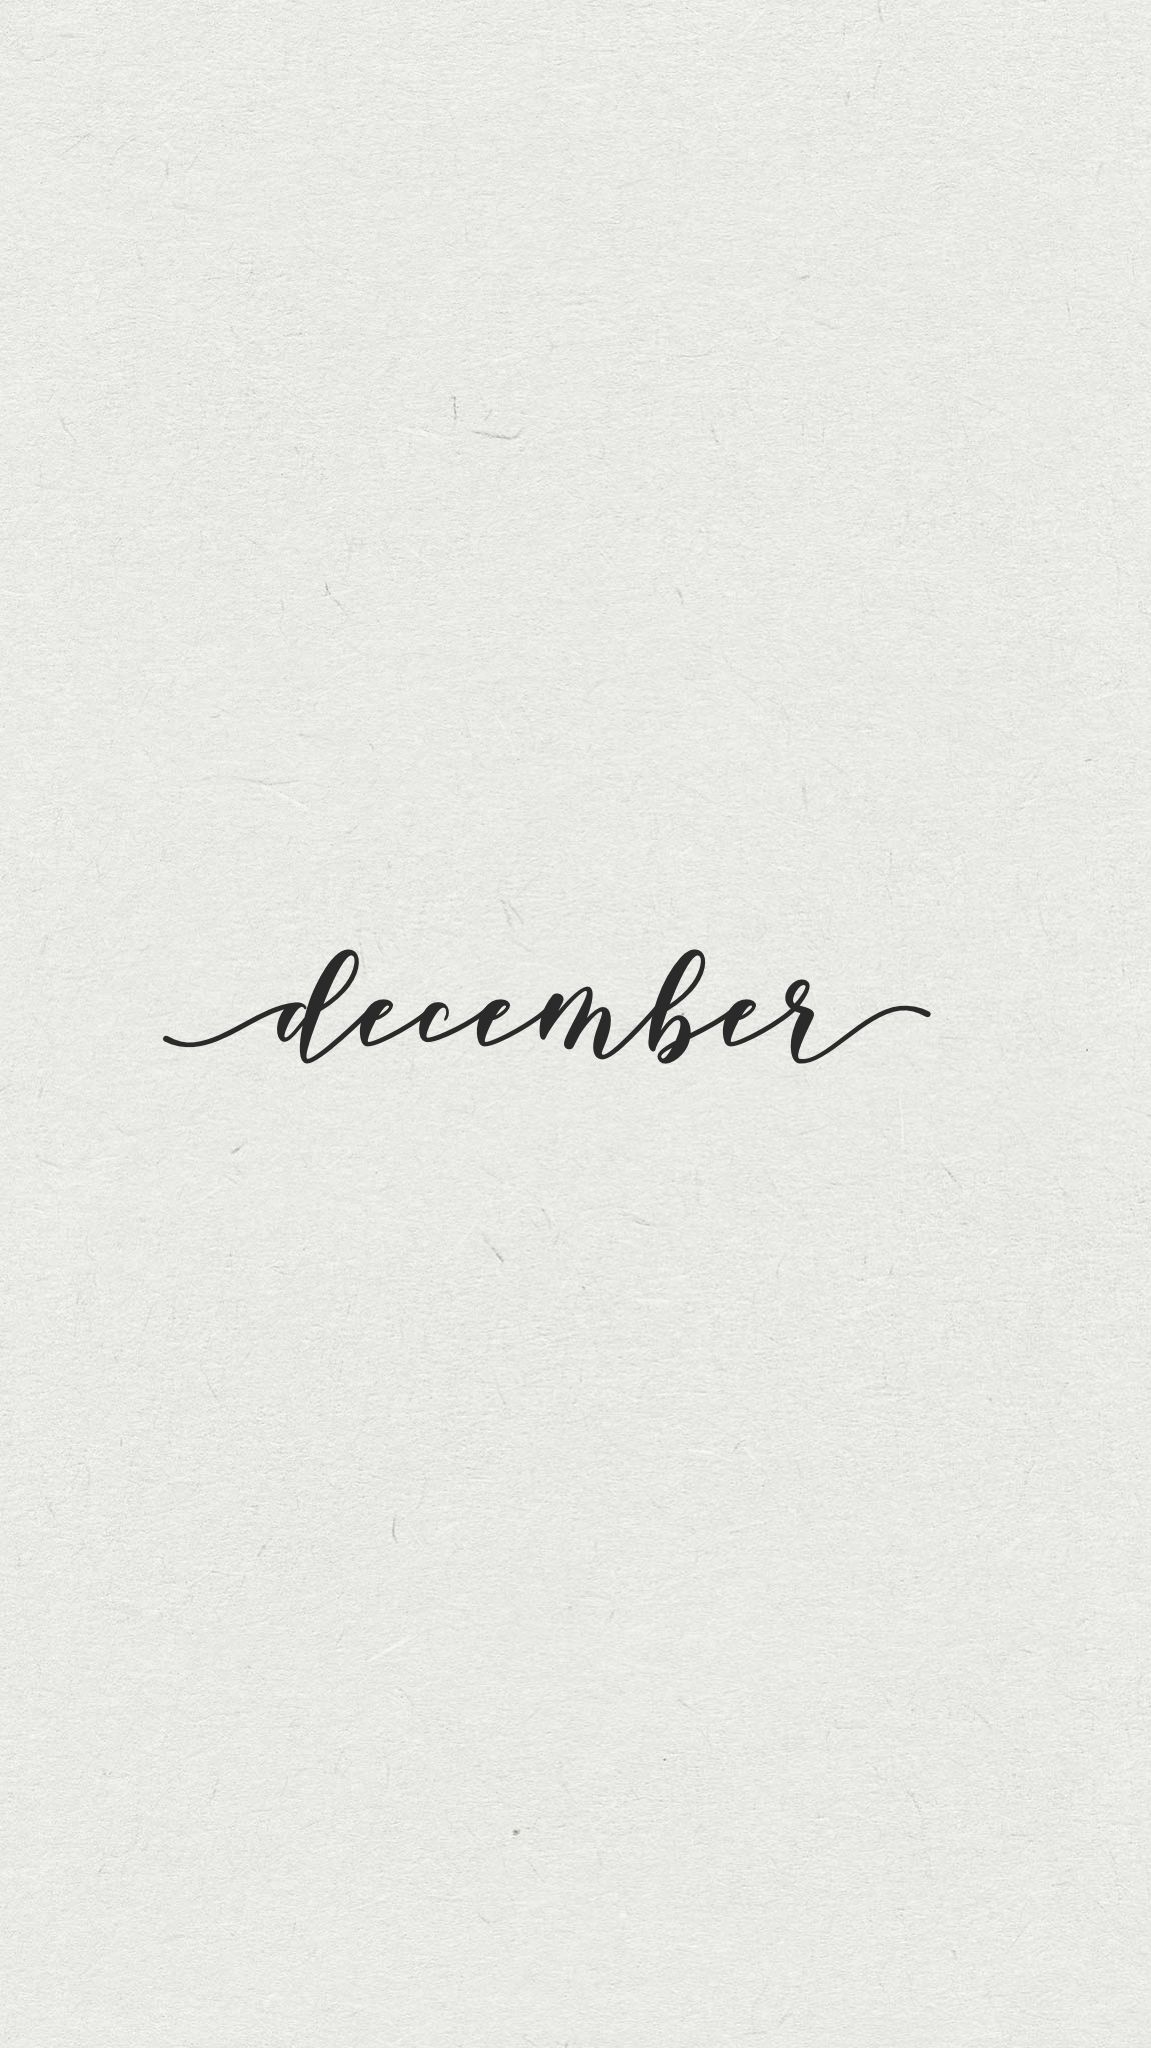 The word december is written in black and white - December